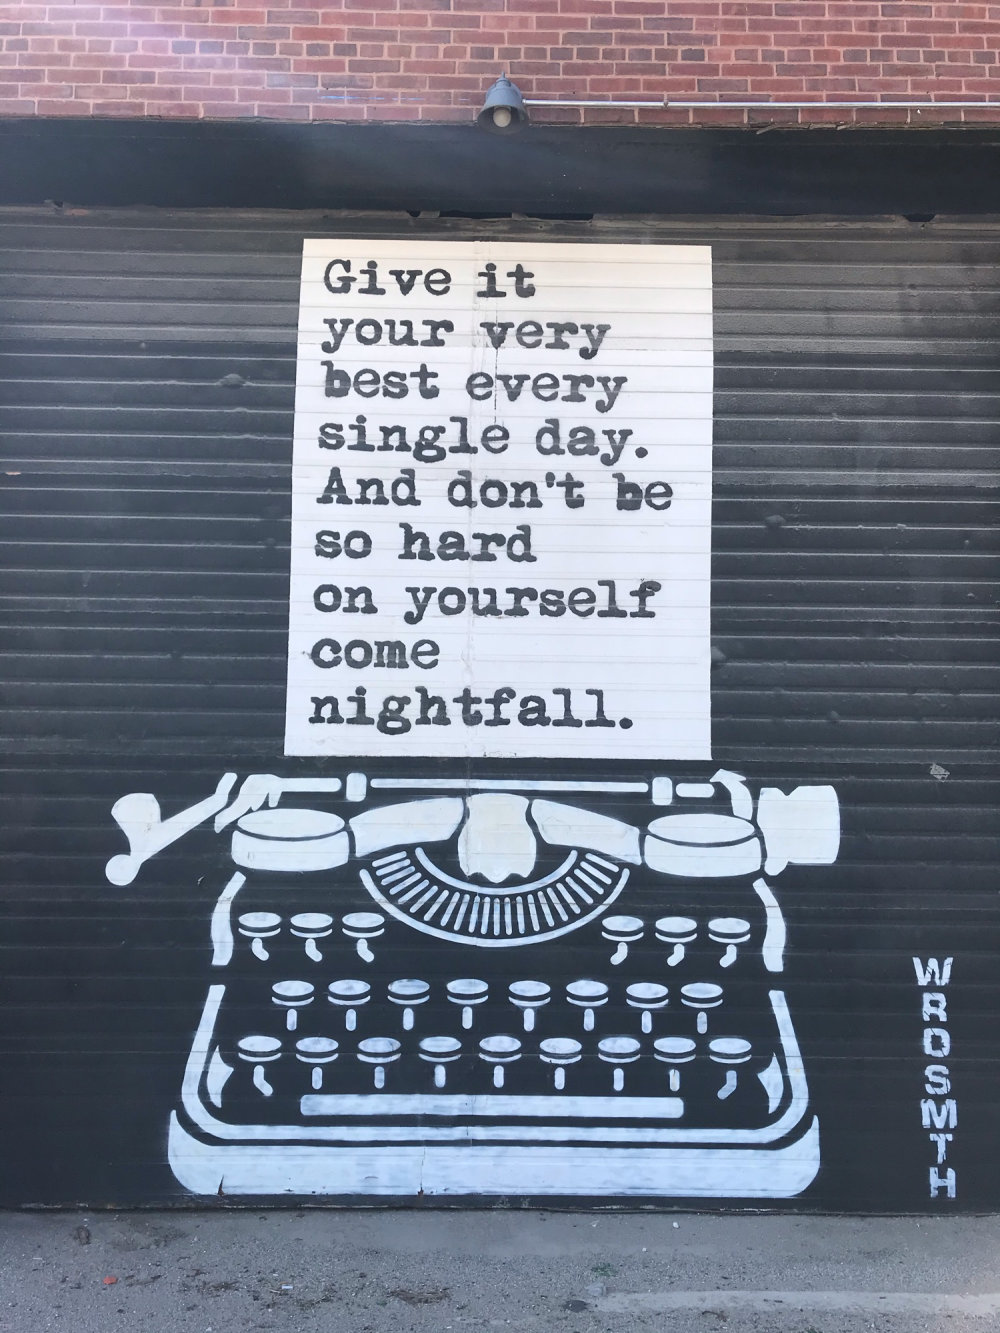 mural in Chicago by artist WRDSMTH.